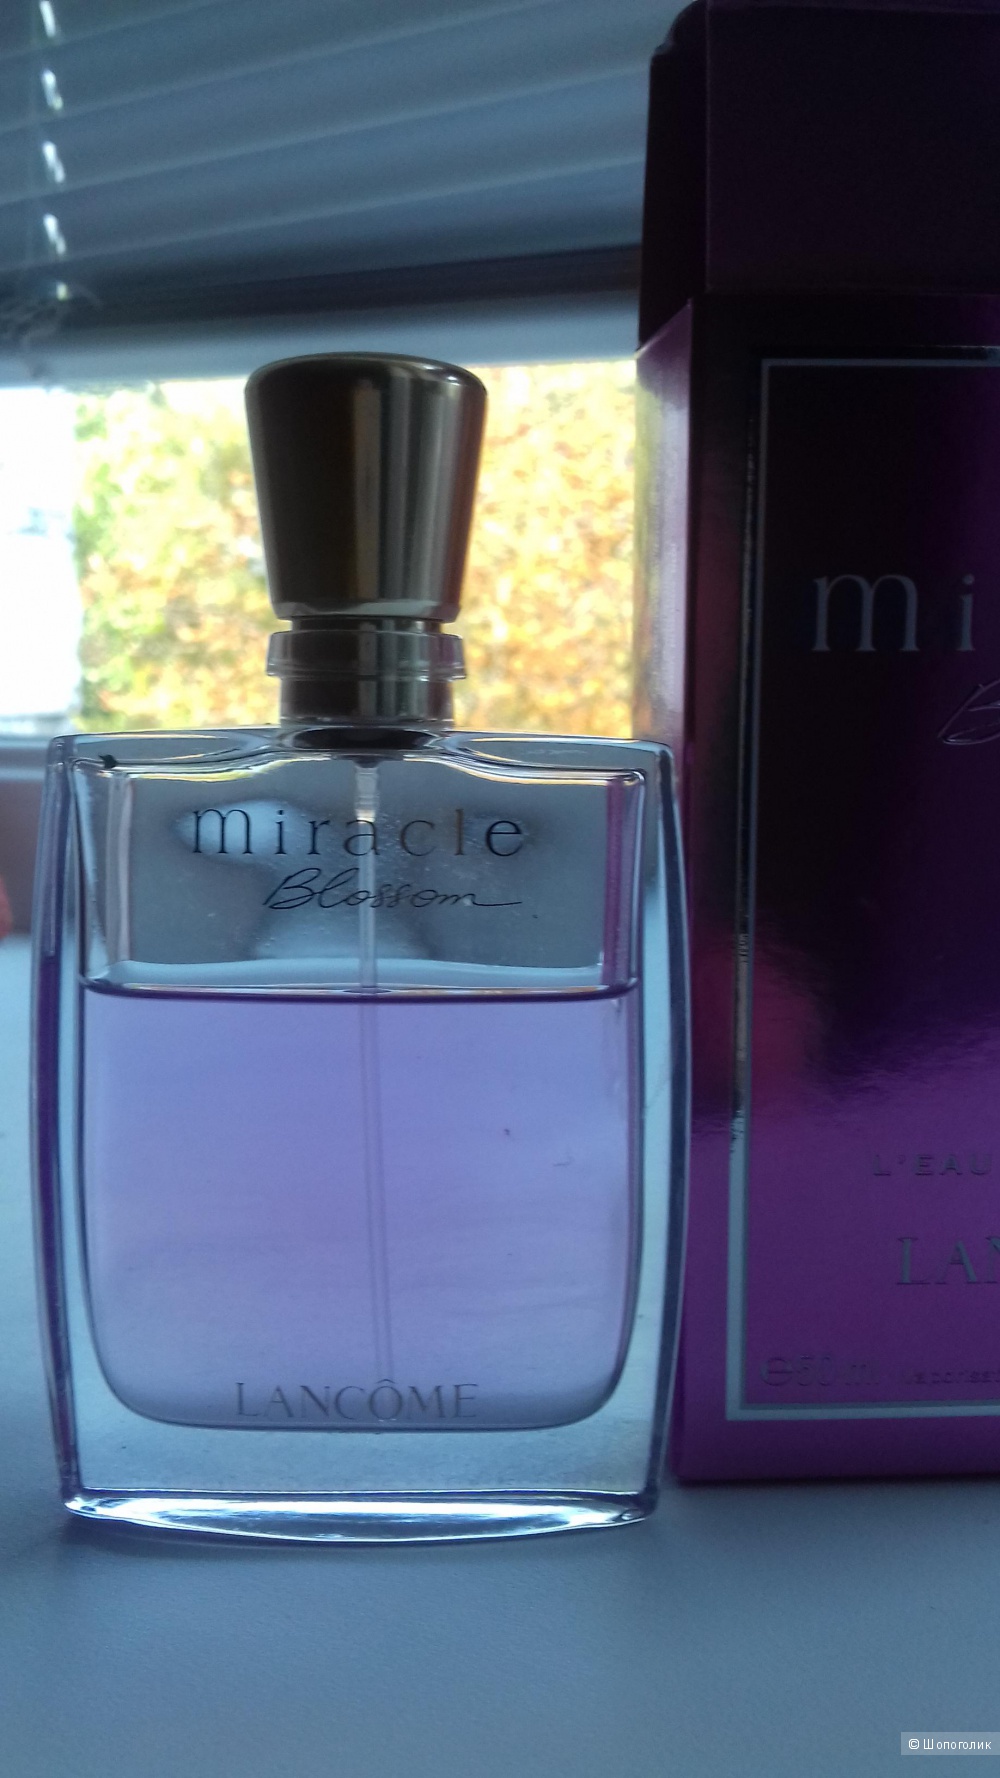 Парфюмерная вода Miracle Blossom Lancome 35/50 мл